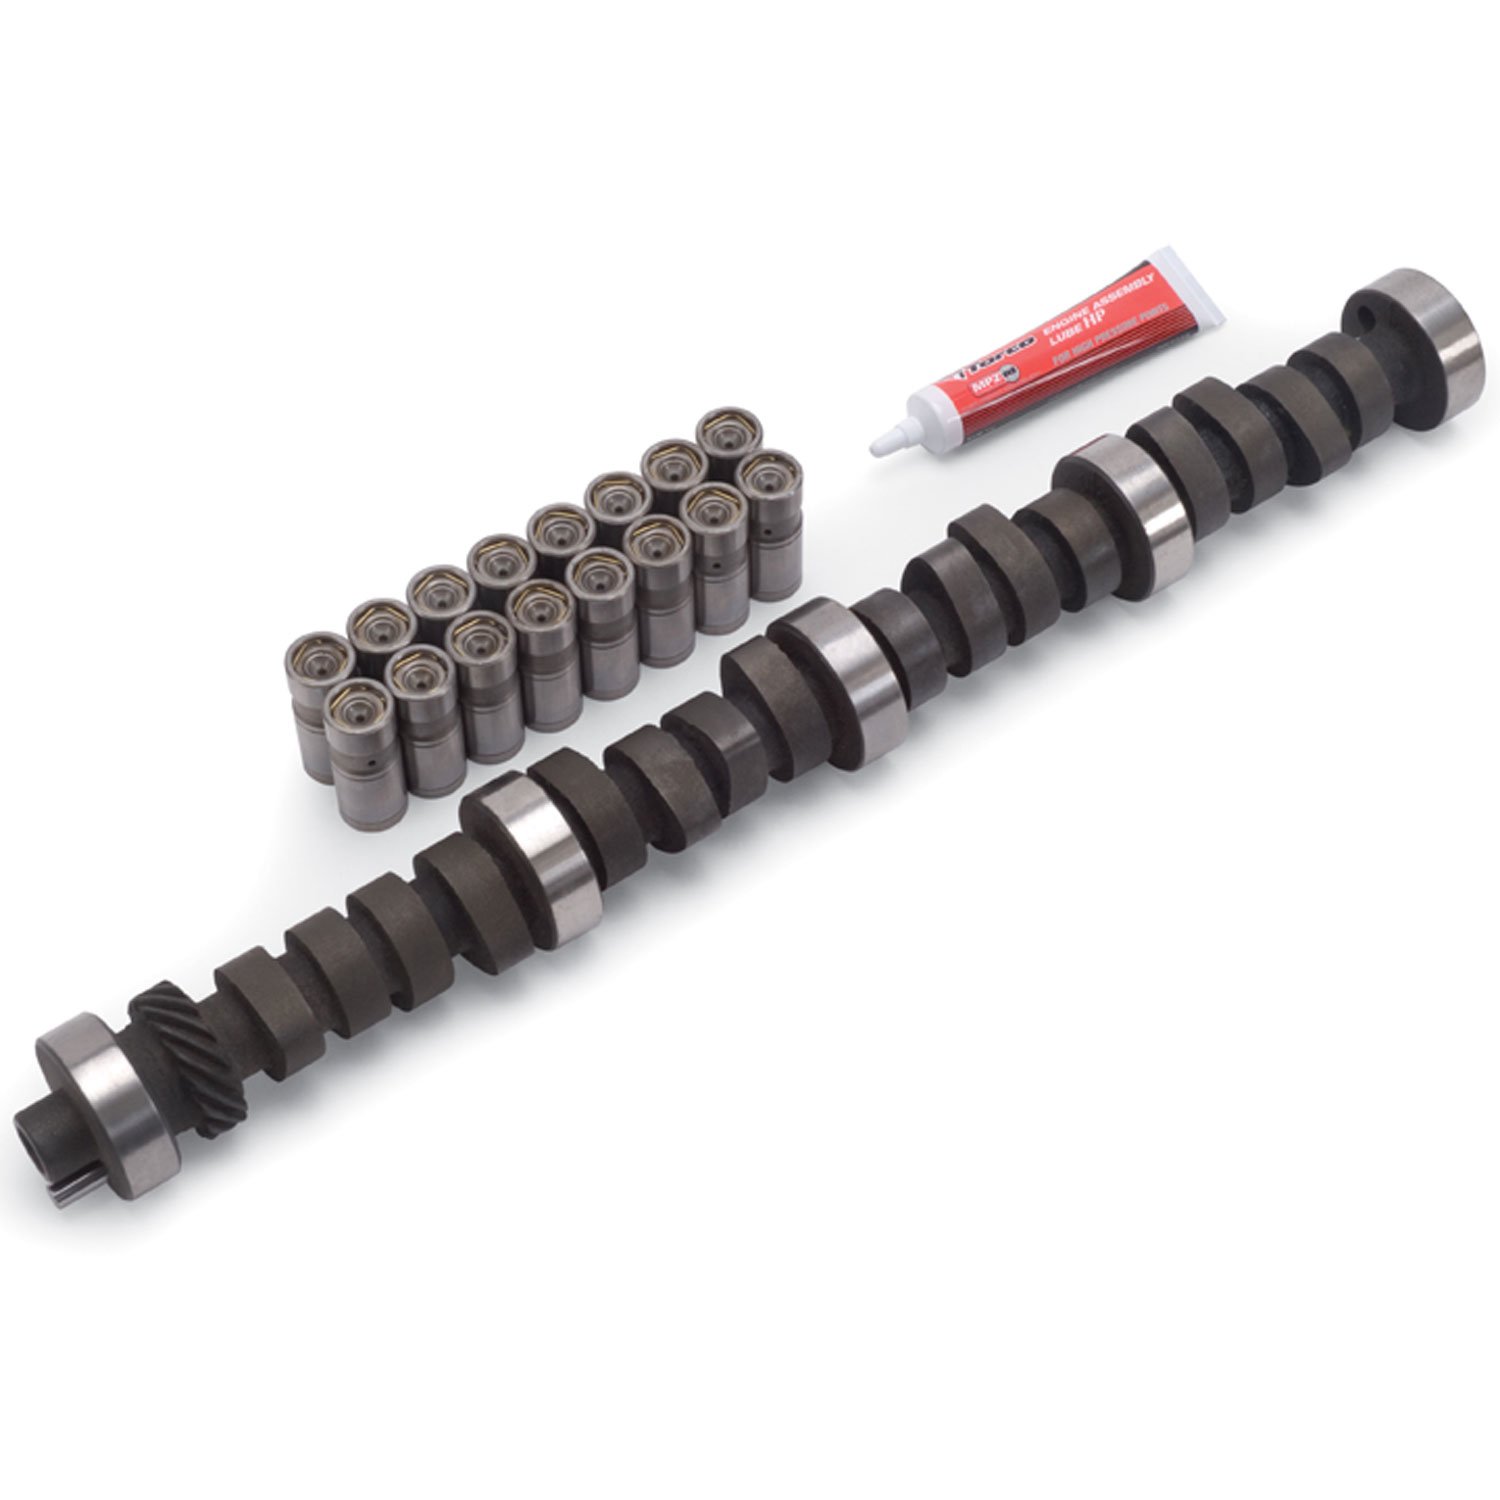 Performer-Plus Camshaft Kit for Small Block Ford 289-302